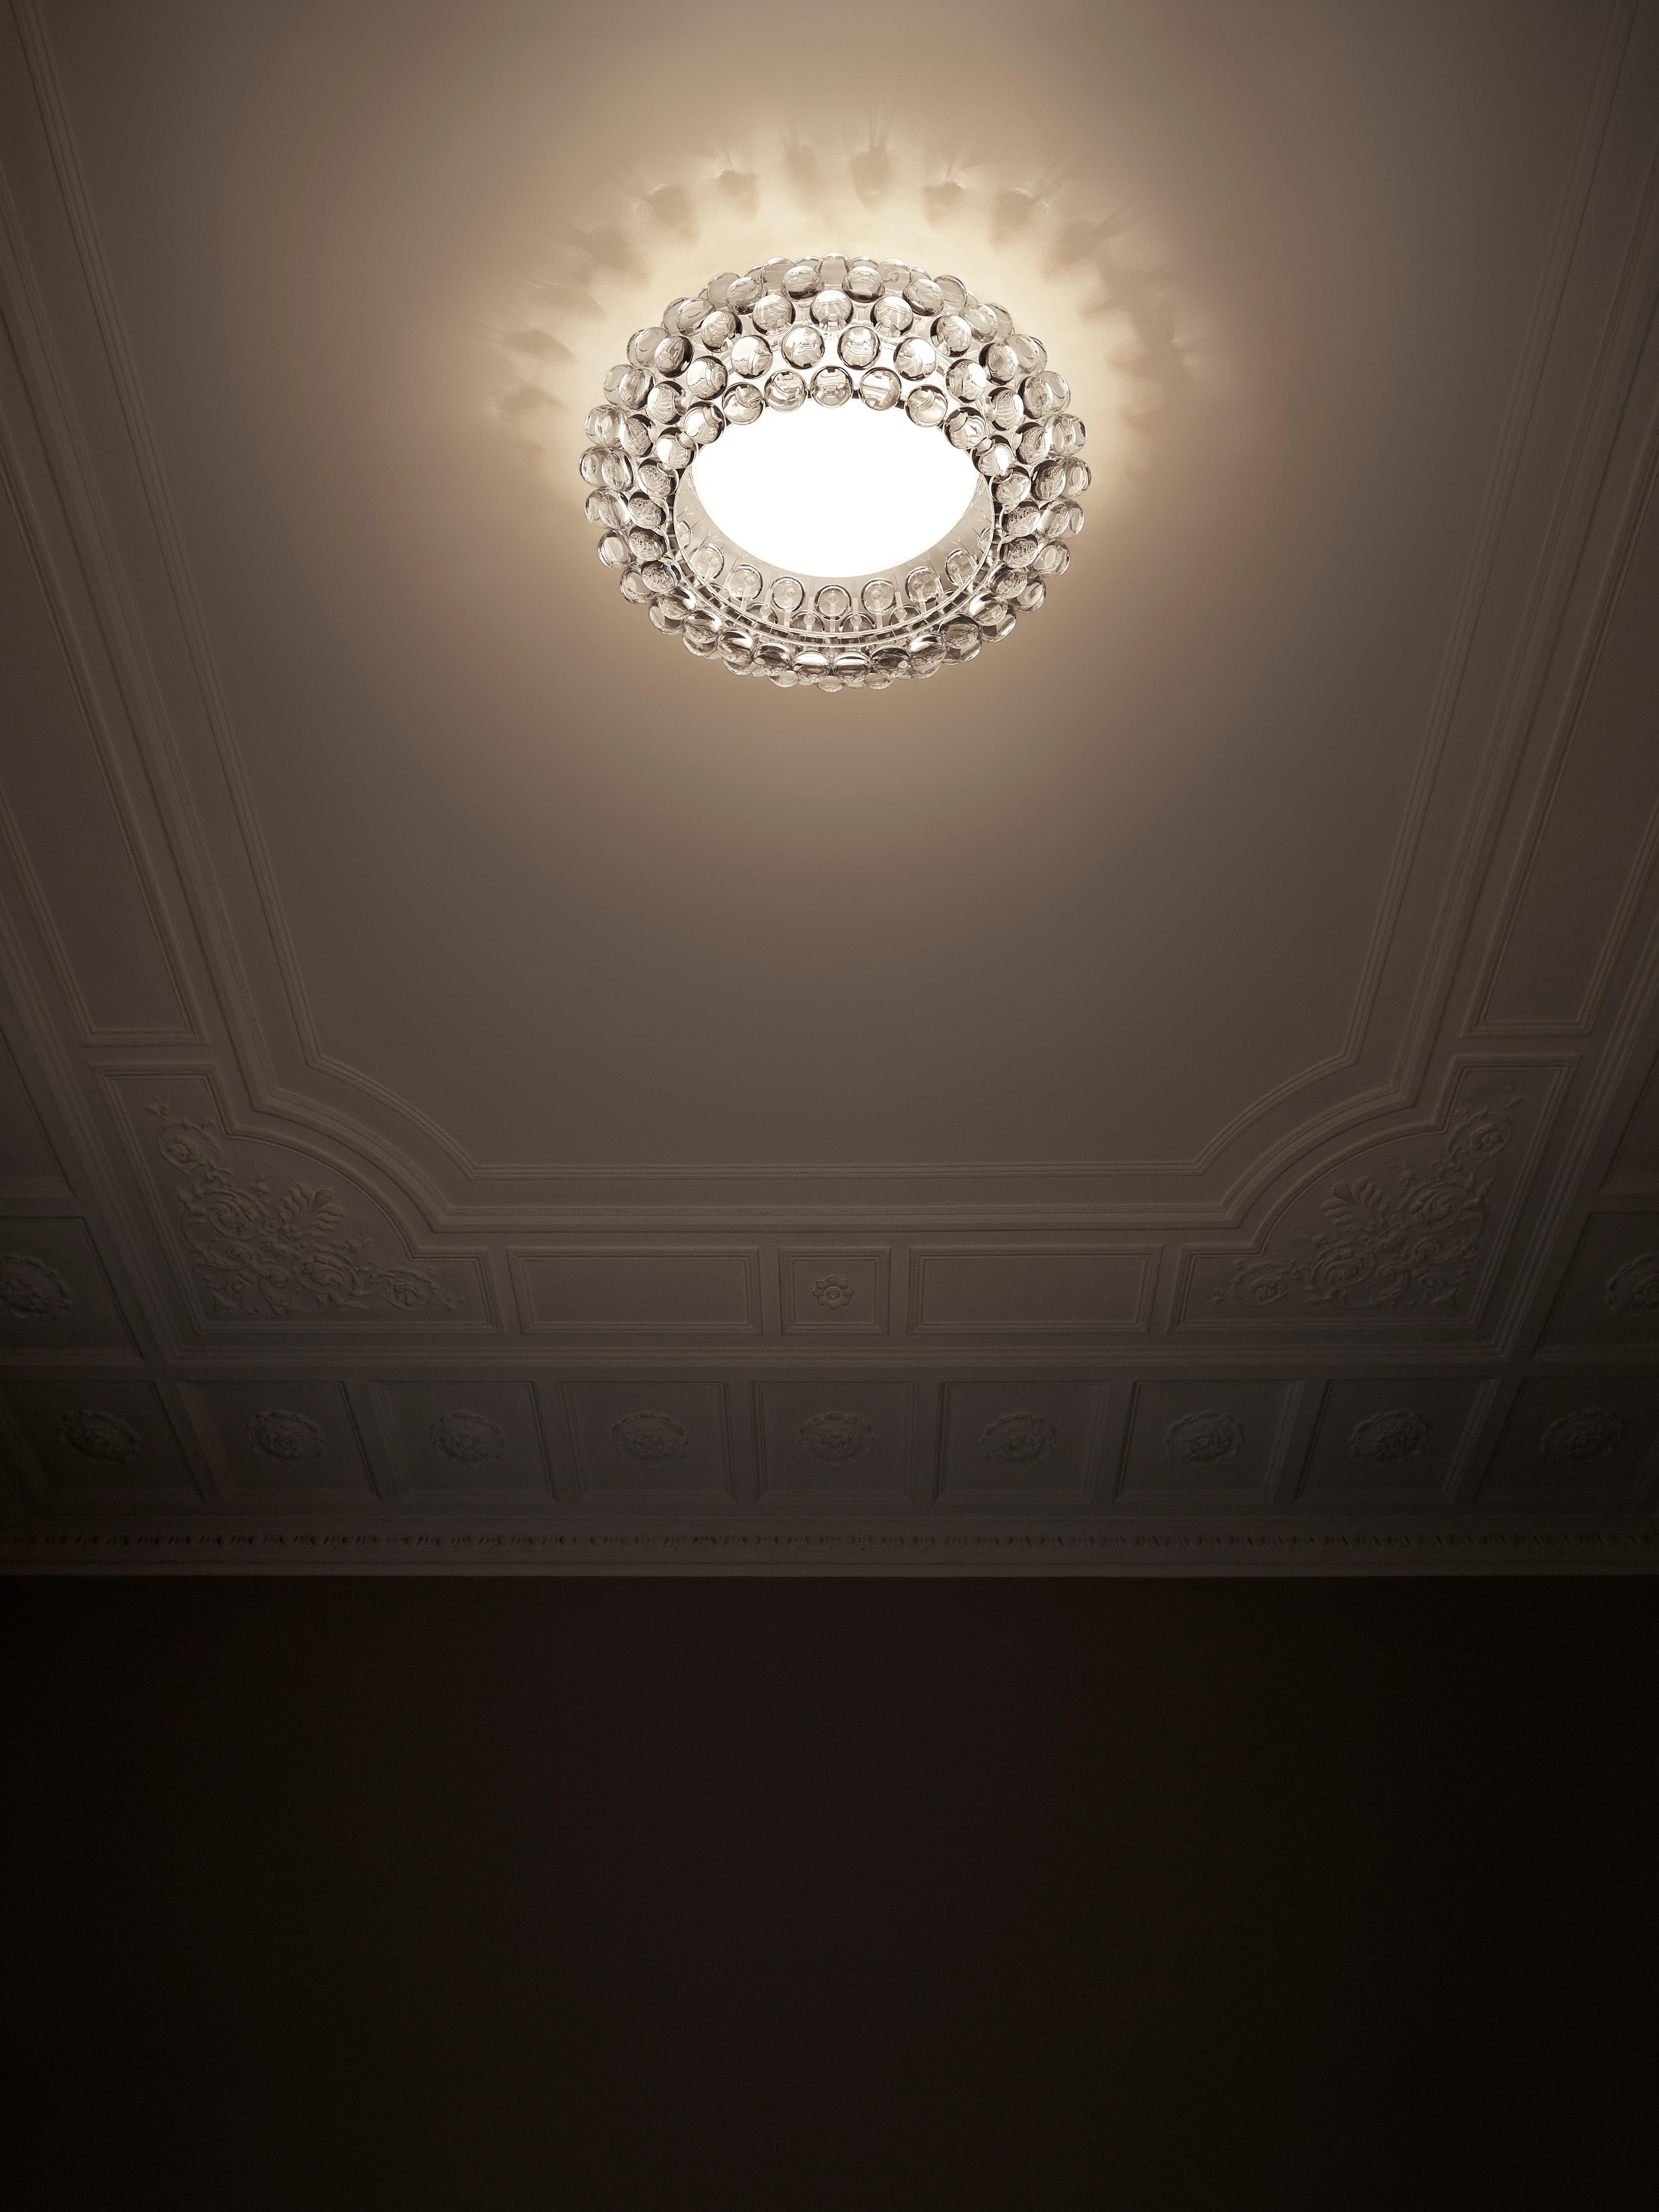 Like a bracelet of sparkling transparent pearls, the Caboche ceiling lamp embellishes any room with its extraordinary lighting effect, where each sphere reflects the image of the light source inside the central diffuser, creating games of light onto